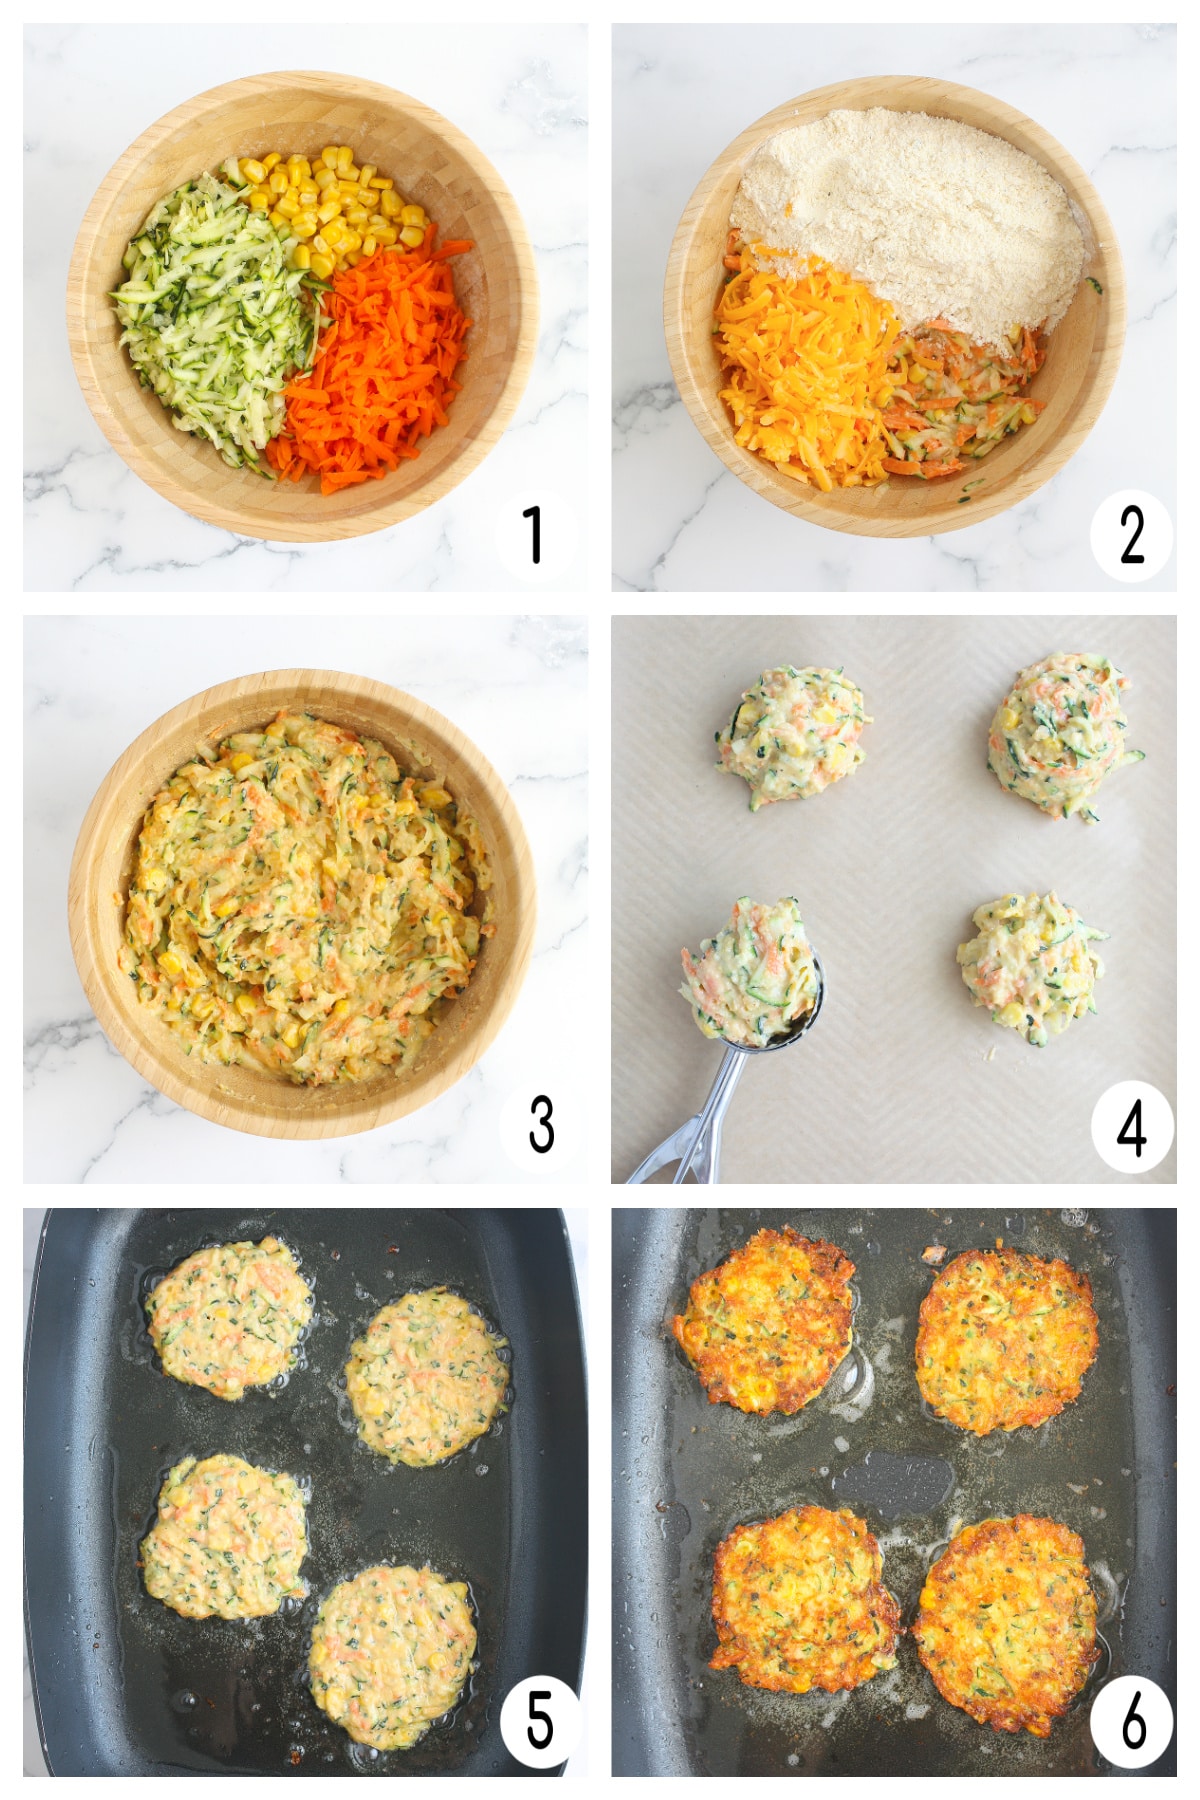 Process shots showing how to make zucchini fritters.